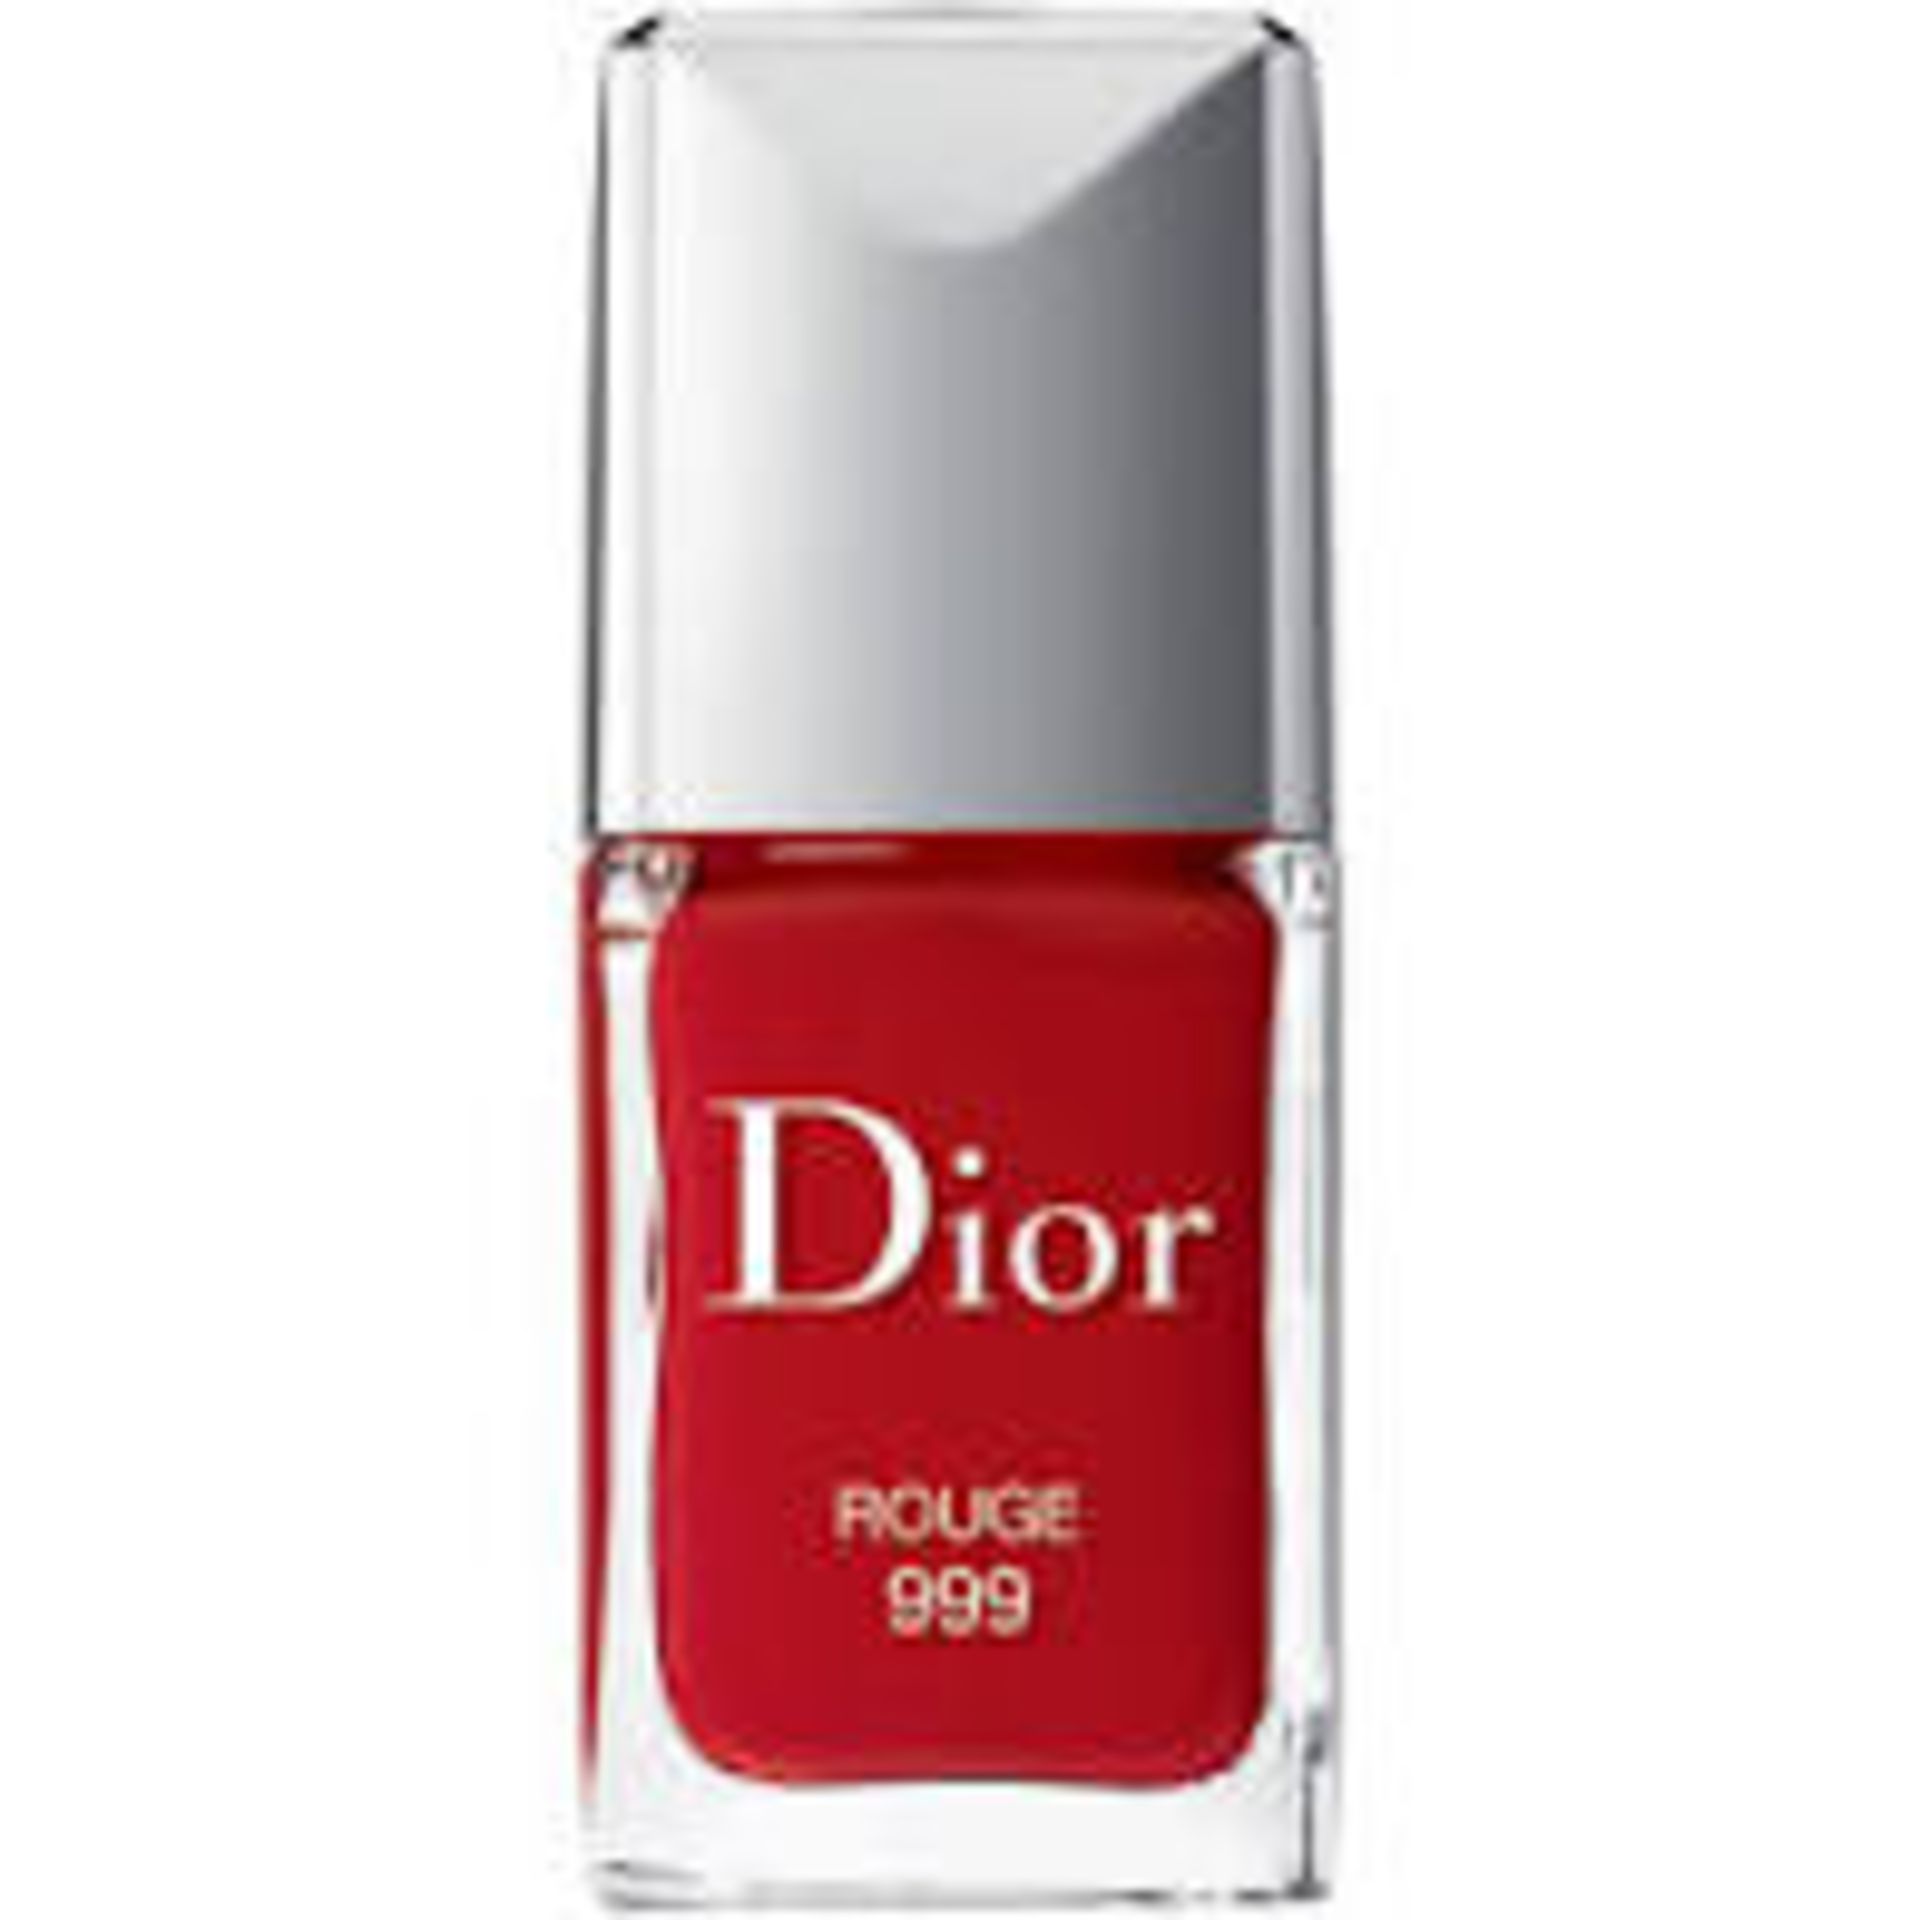 RRP £22 Dior Vernis Nail Polish (Shade 999 Rouge) Ex Display (Pictures Are For Illustration Purposes